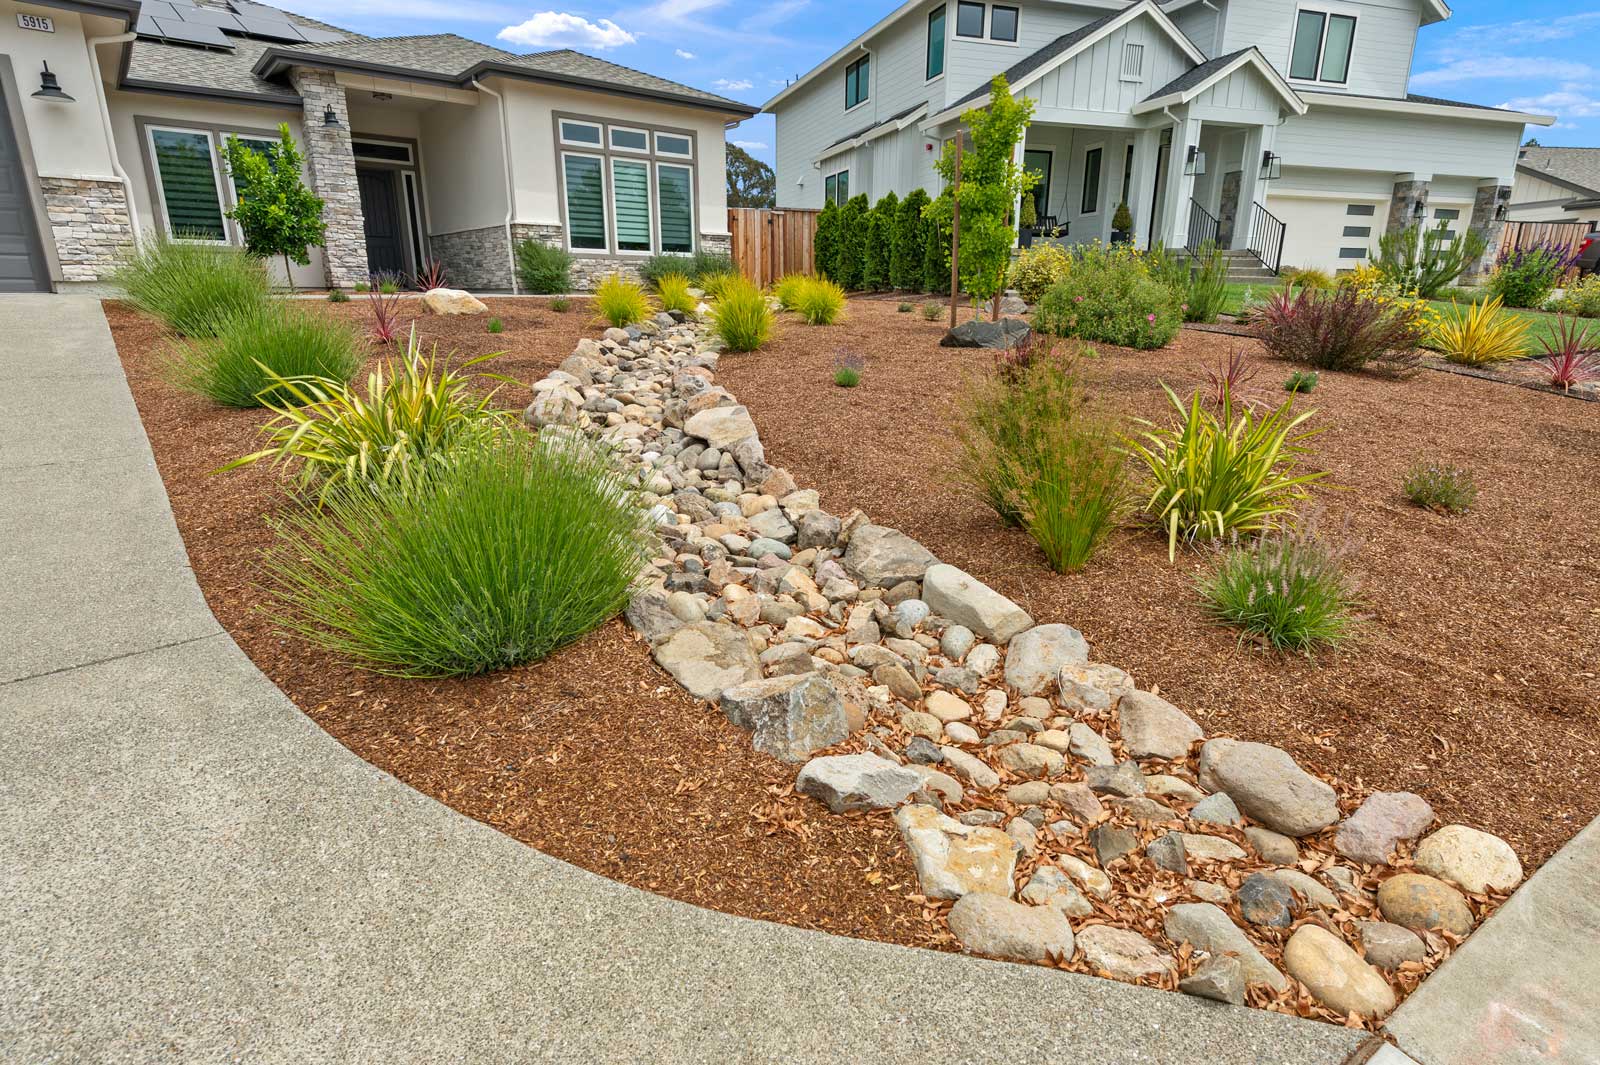 Quality landscaping includes drought resistant garden design